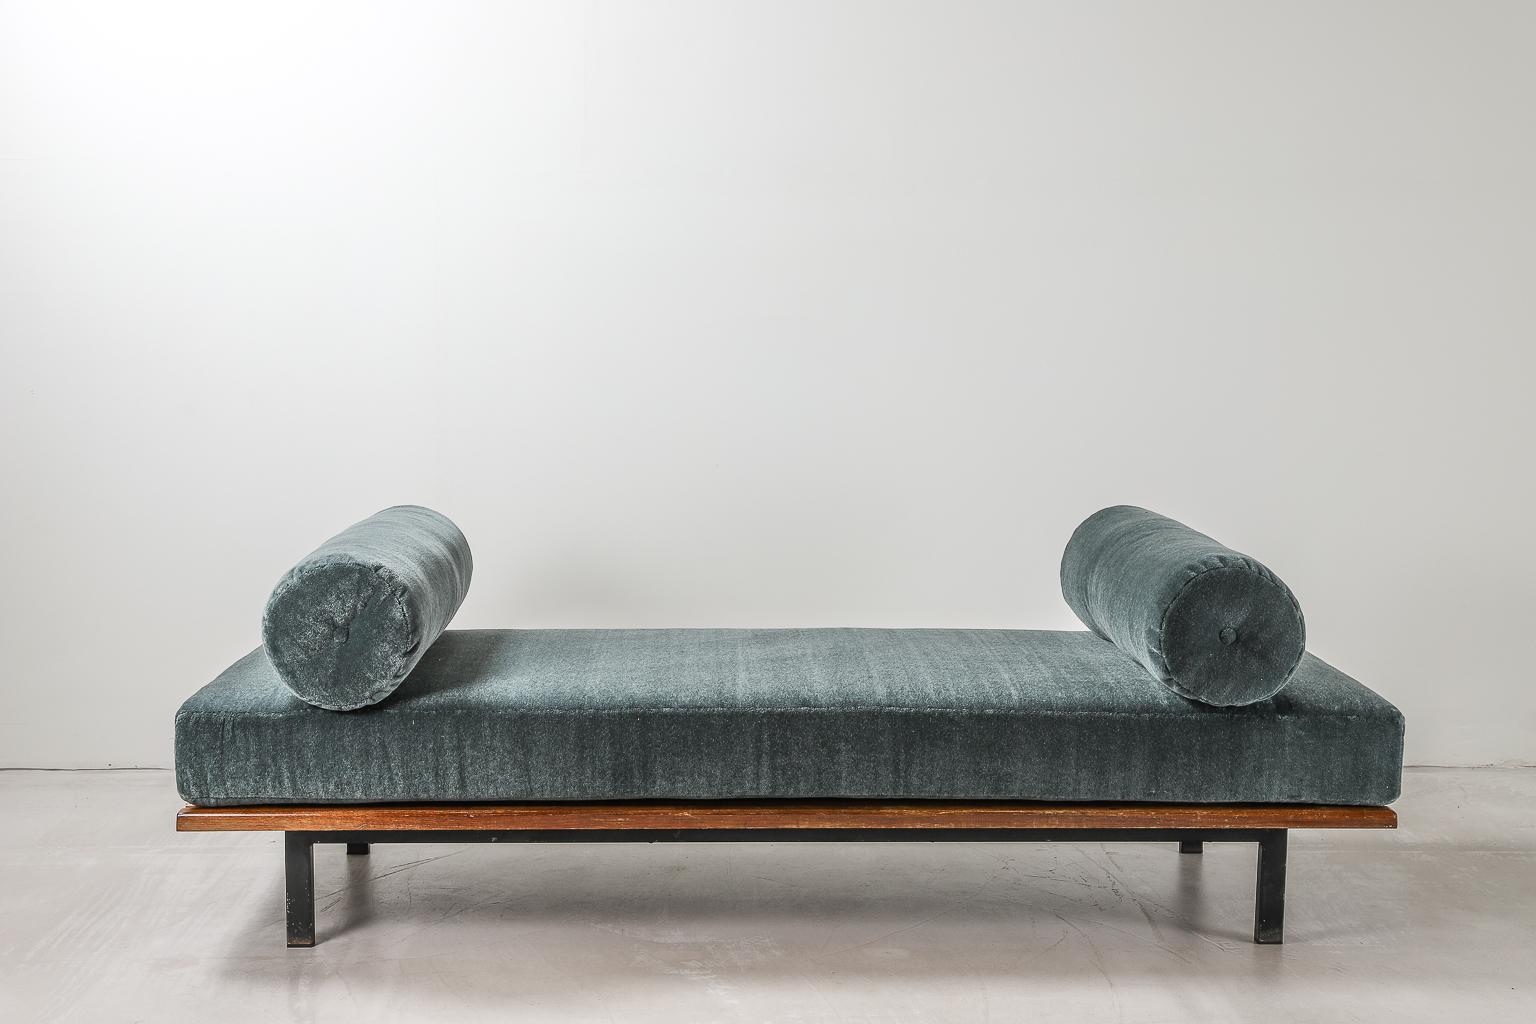 Cansado bench designed by Charlotte Perriand in 1958, mahogany bench with steel frame & legs with newly upholstered seat cushions in Mohair Velvet by Thurstan. The bench itself was built for the city Cansado, a town built in the late 1950s by the